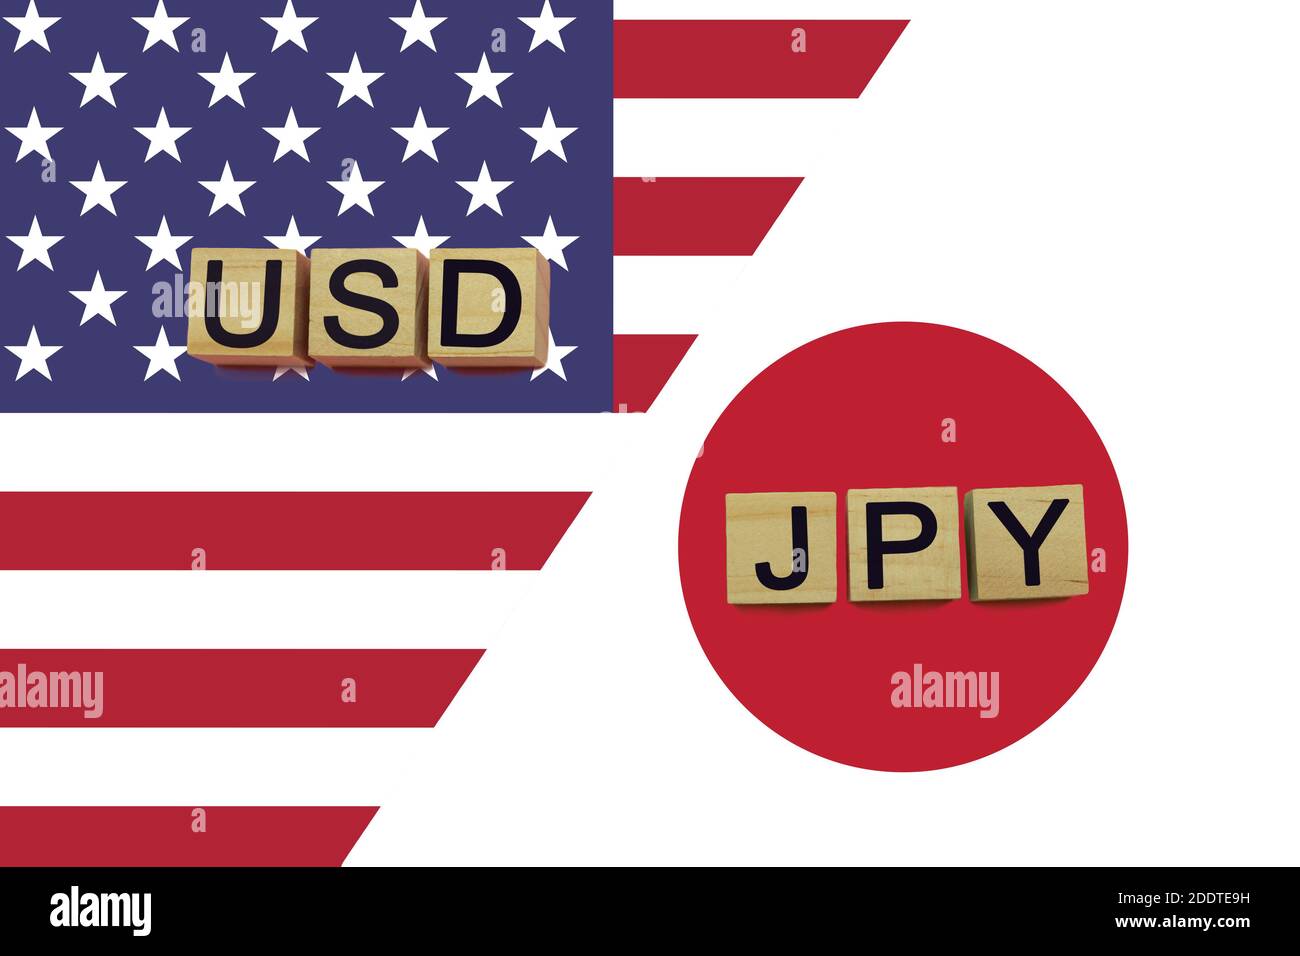 American and Japanese currencies codes on national flags background. USD and JPY currencies Stock Photo